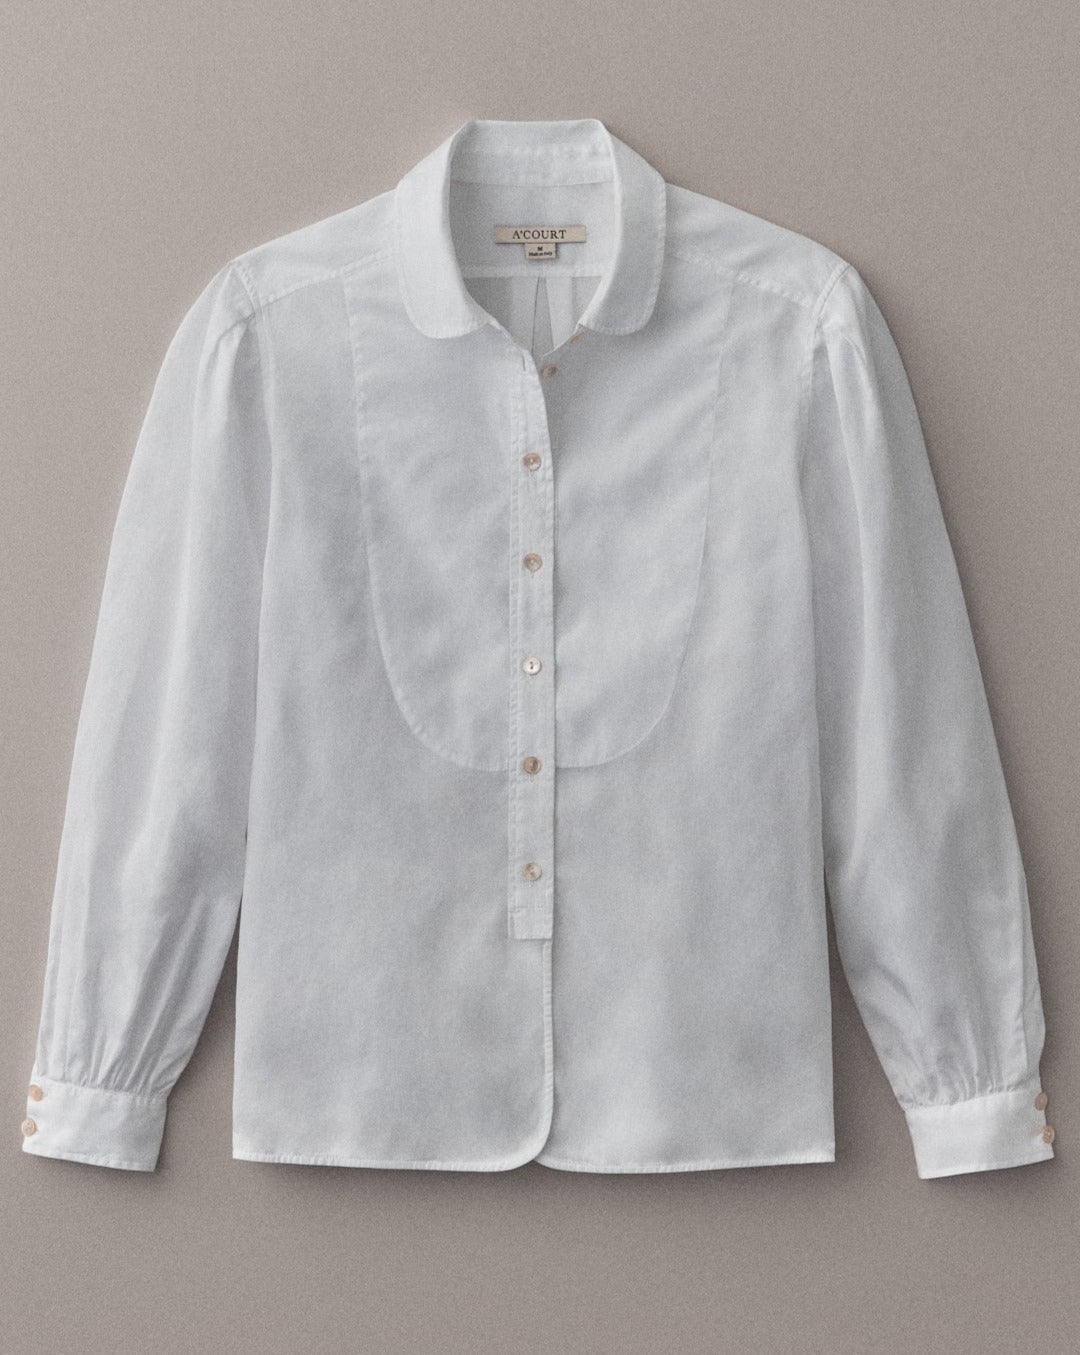 A long sleeve blouse in white cotton with a classic menswear silhouette lies flat on a light brown field.